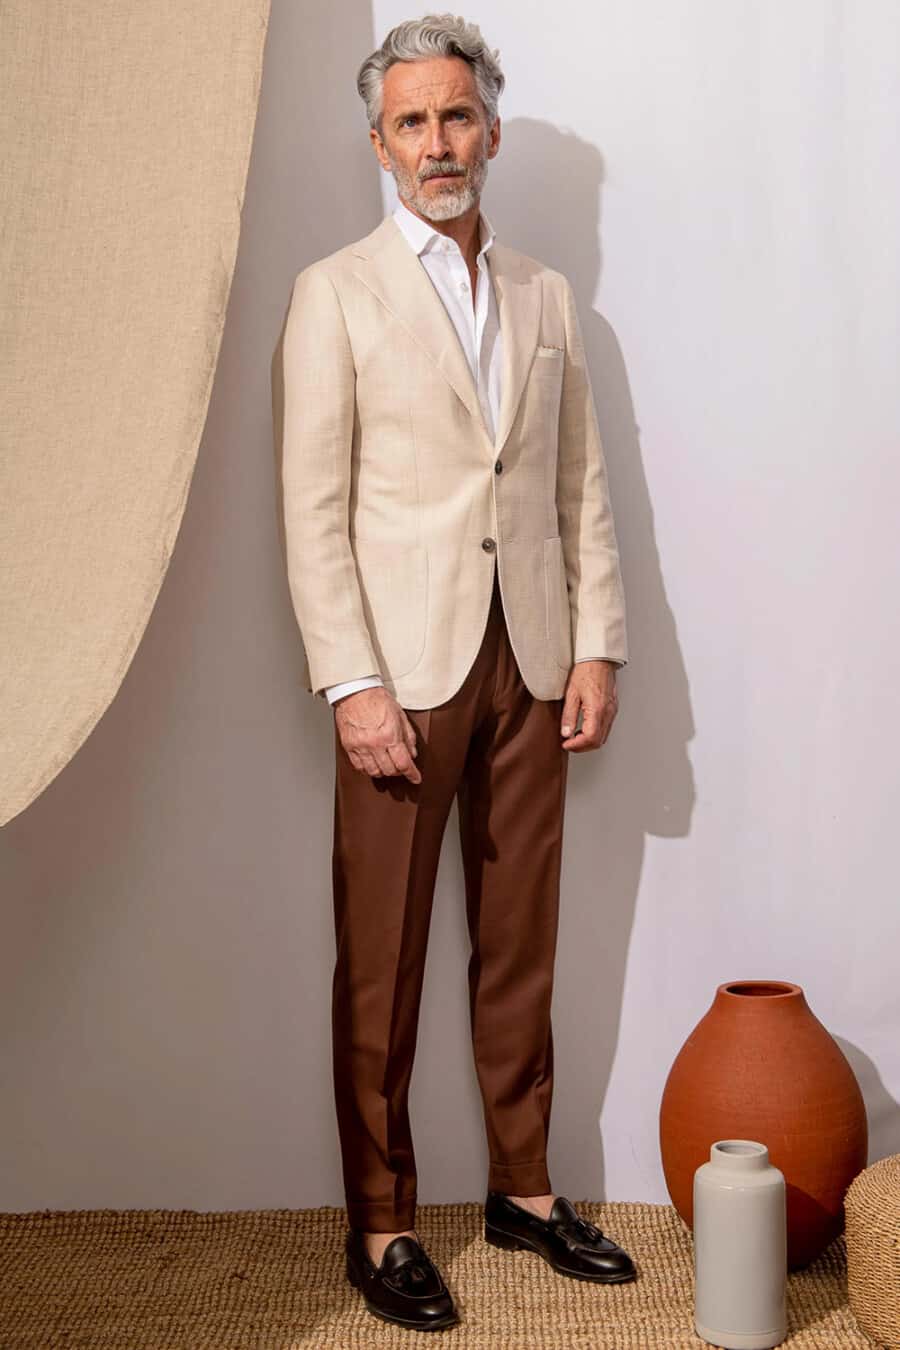 Men's rich brown trousers, white dress shirt, cream blazer and brown leather tassel loafers outfit